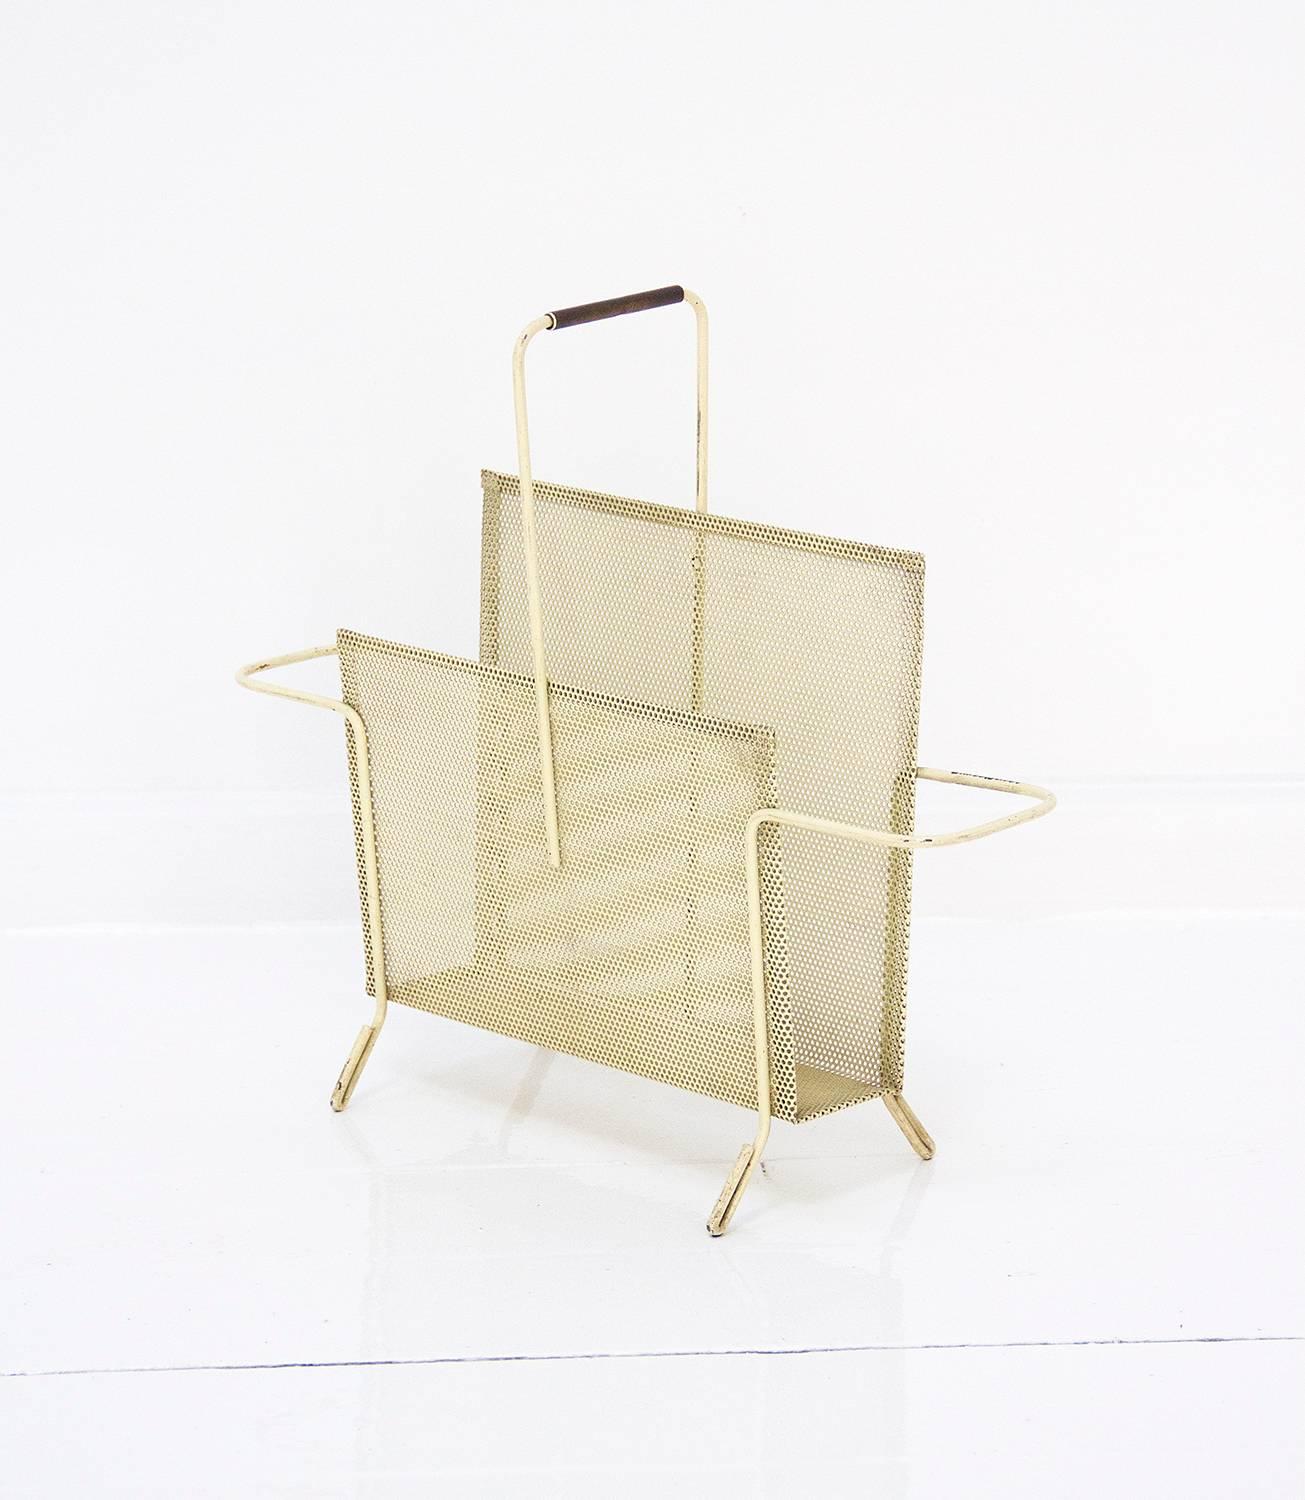 Magazine holder designed by Mathieu Matégot and manufactured by Ateliers Matégot in France. It is made of perforated folded metal in a very good original condition and preservating original patina,
circa 1950, France.

  